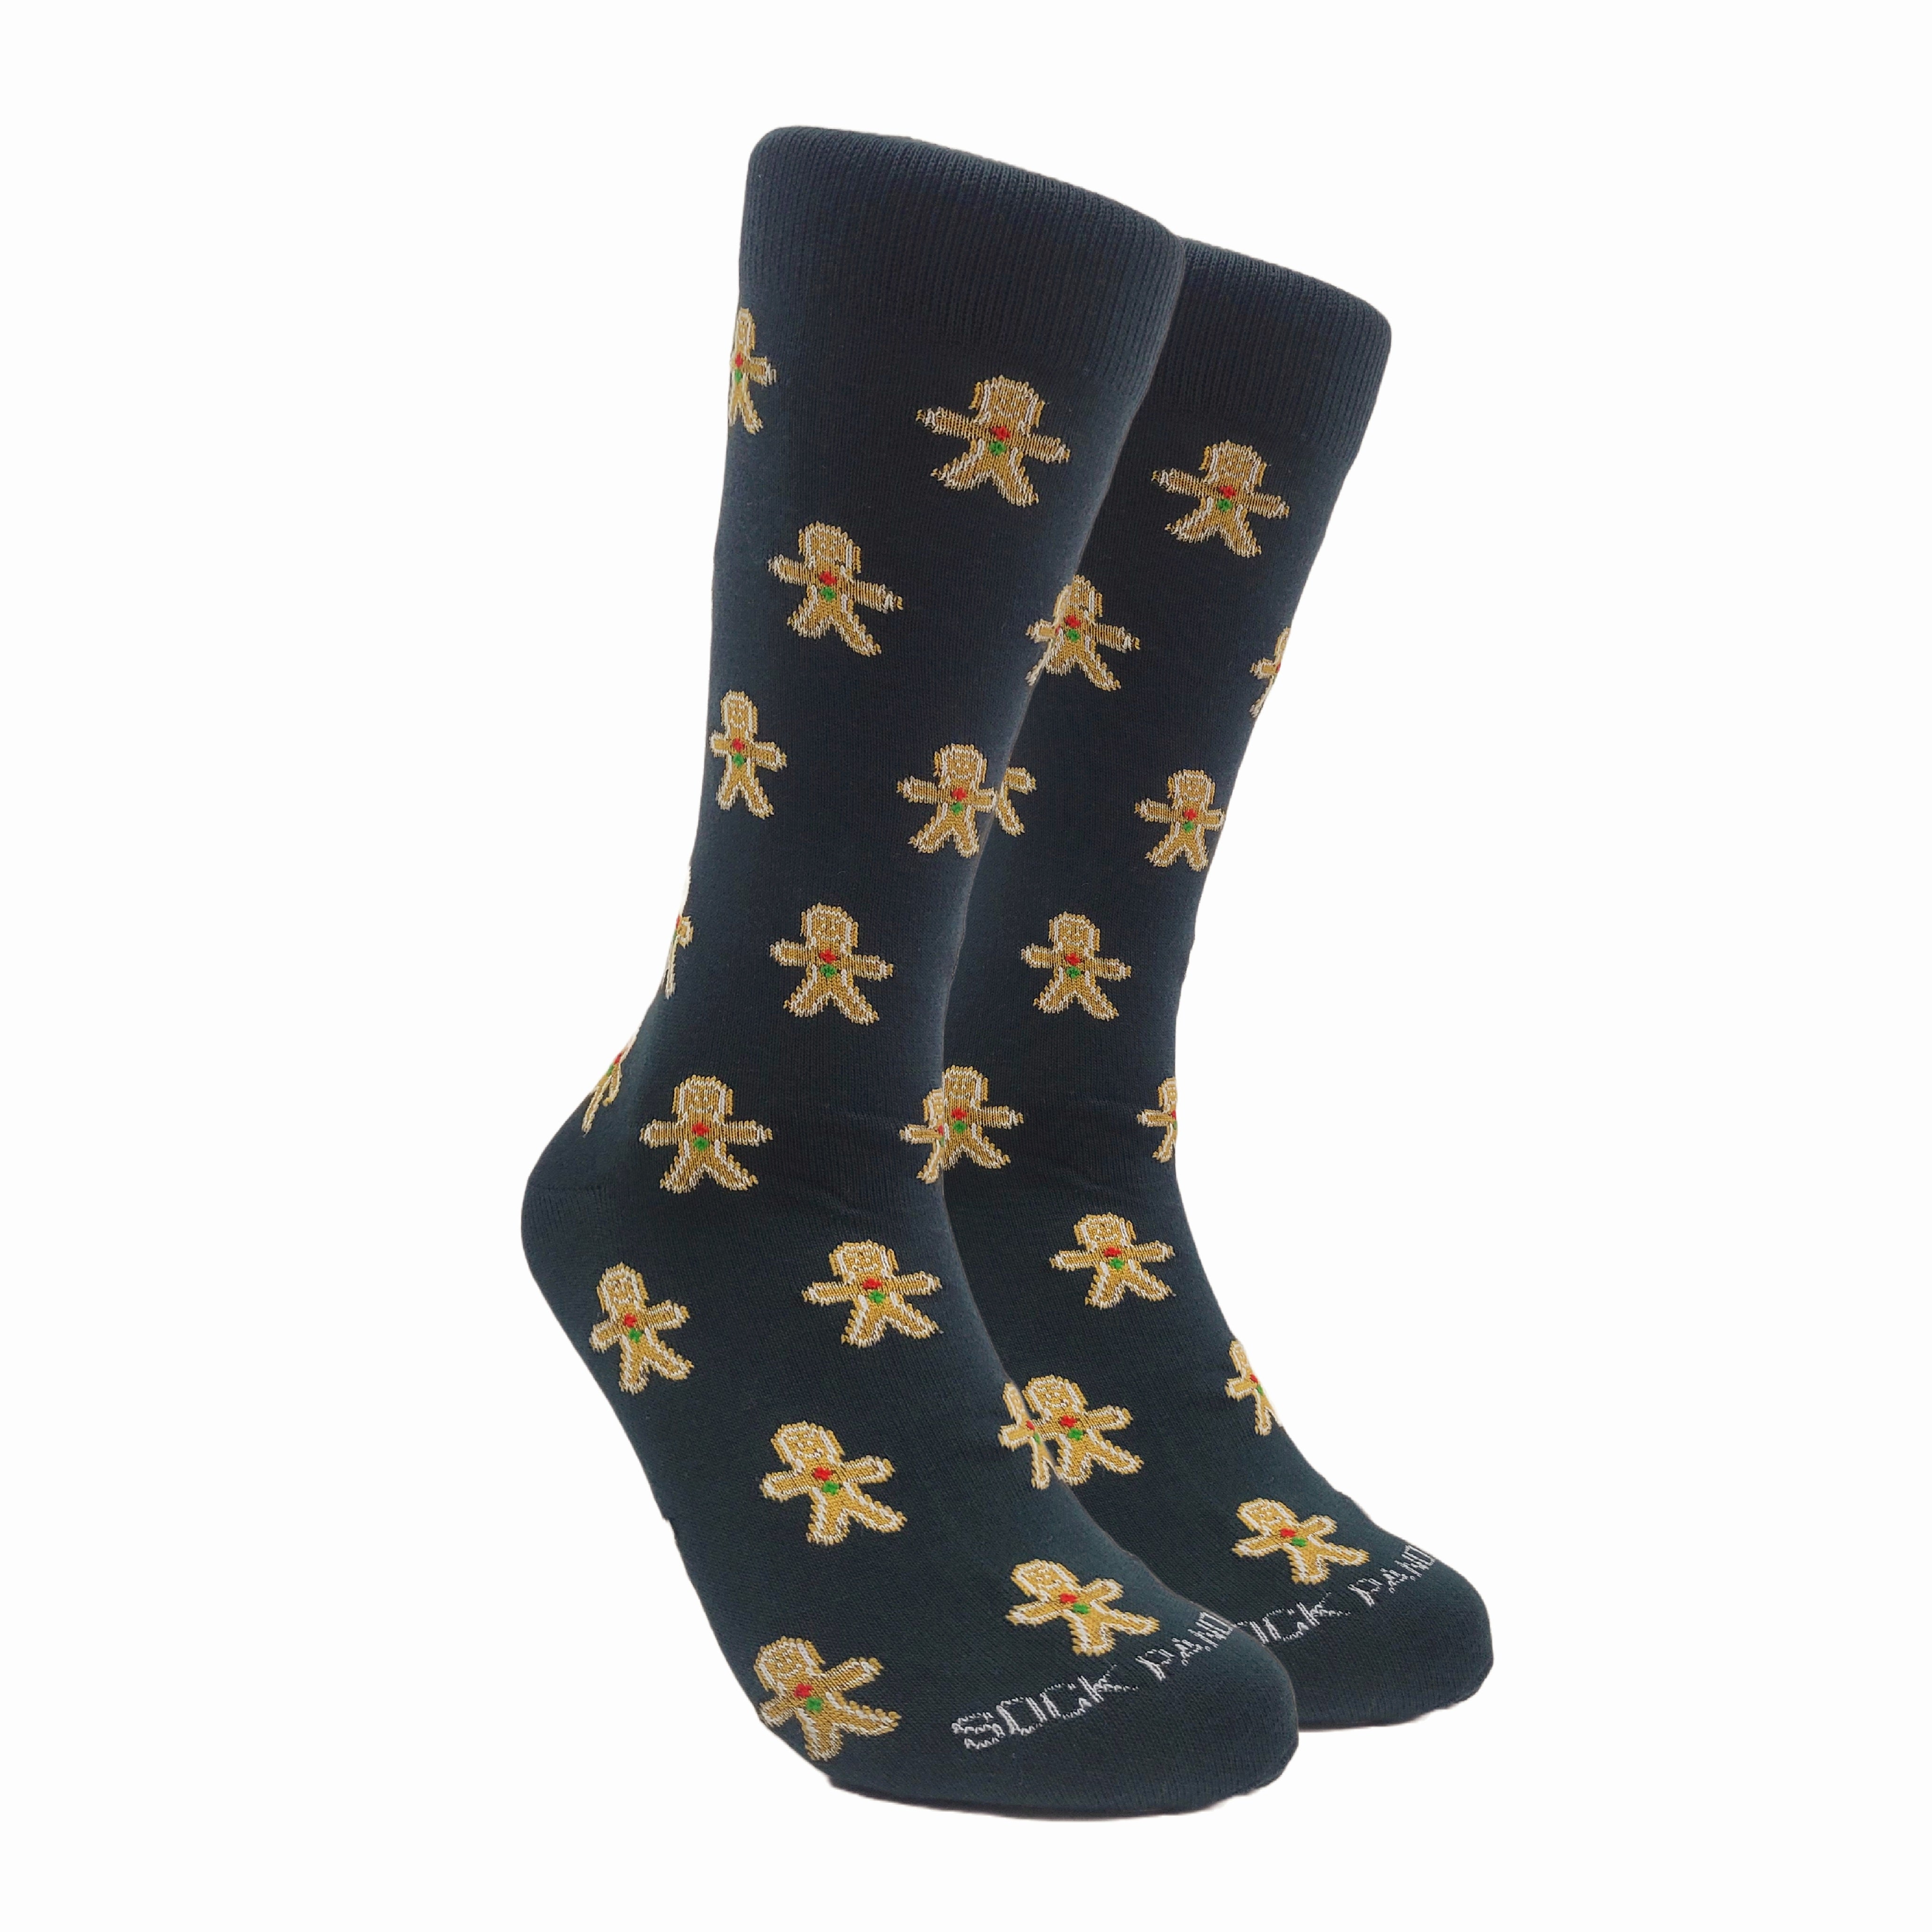 Gingerbread Man Patterned Socks from the Sock Panda (Adult Large)